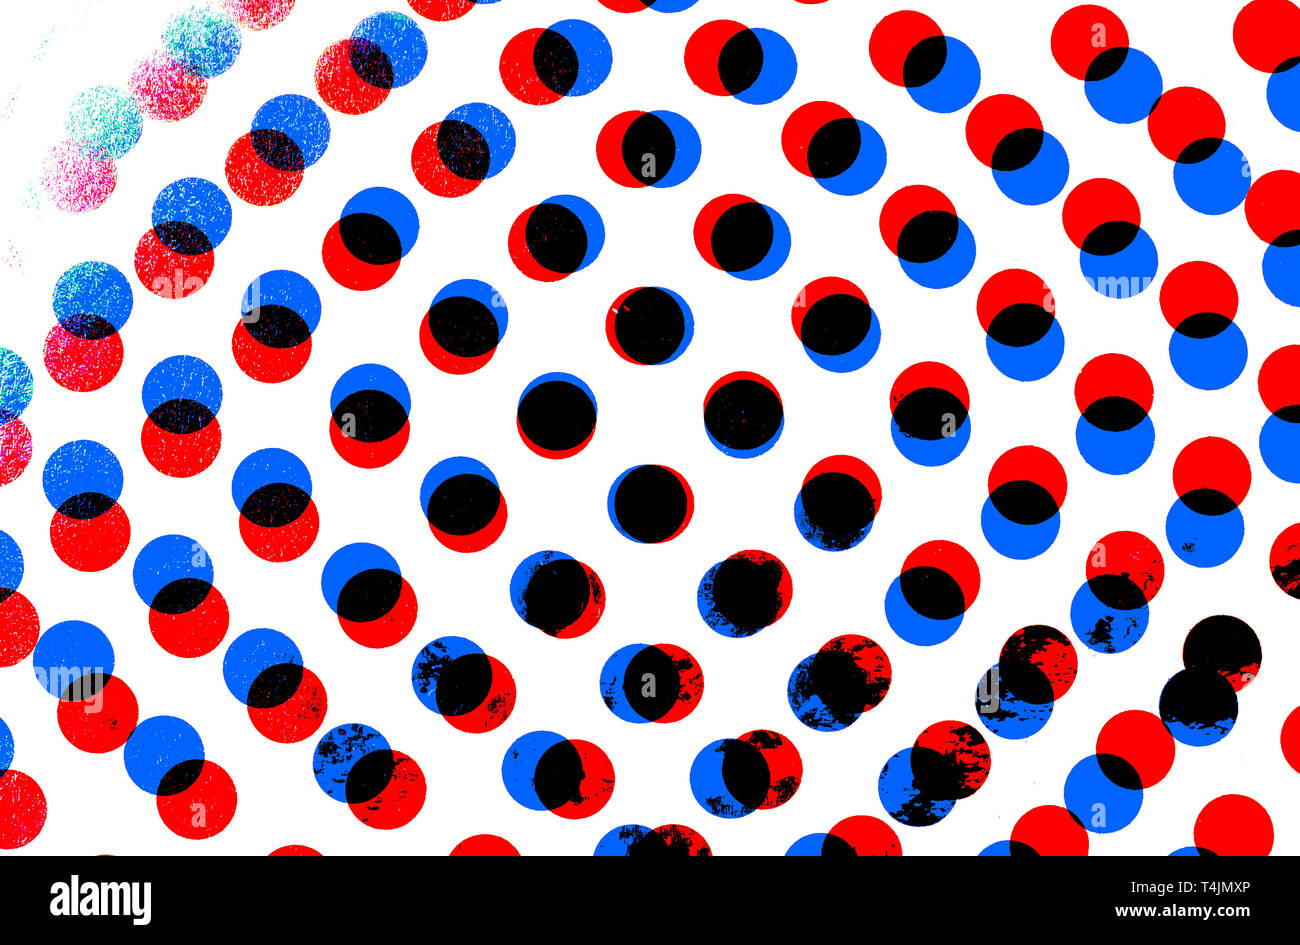 abstract red and blue dots pattern can be background Stock Photo